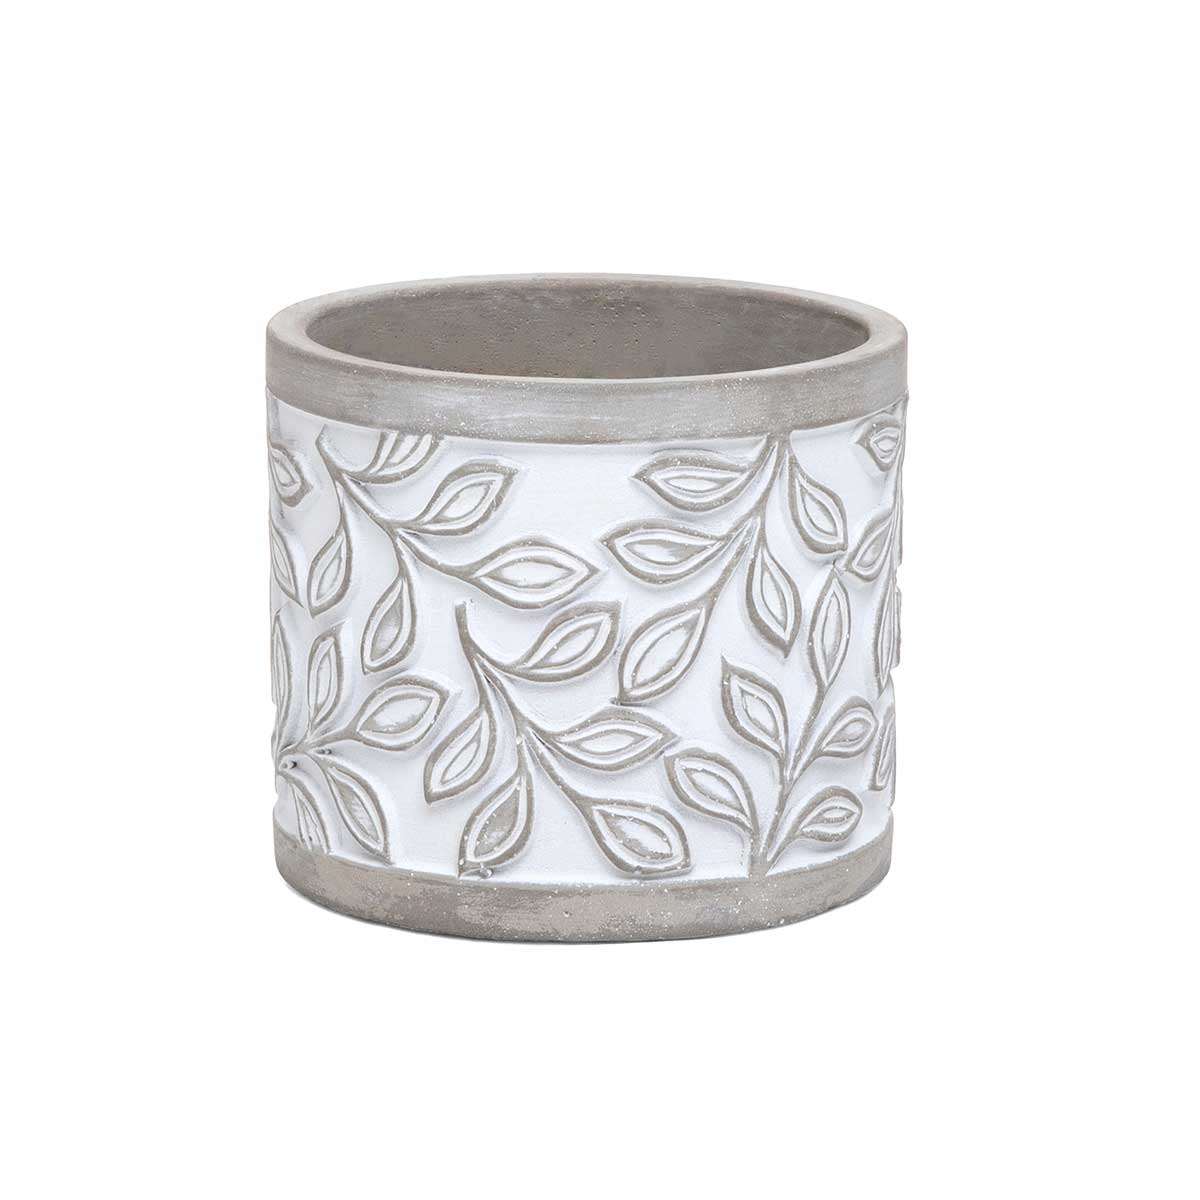 POT LAUREL LEAF GREY SMALL 4.25IN X 3.75IN WHITE CONCRETE - Click Image to Close